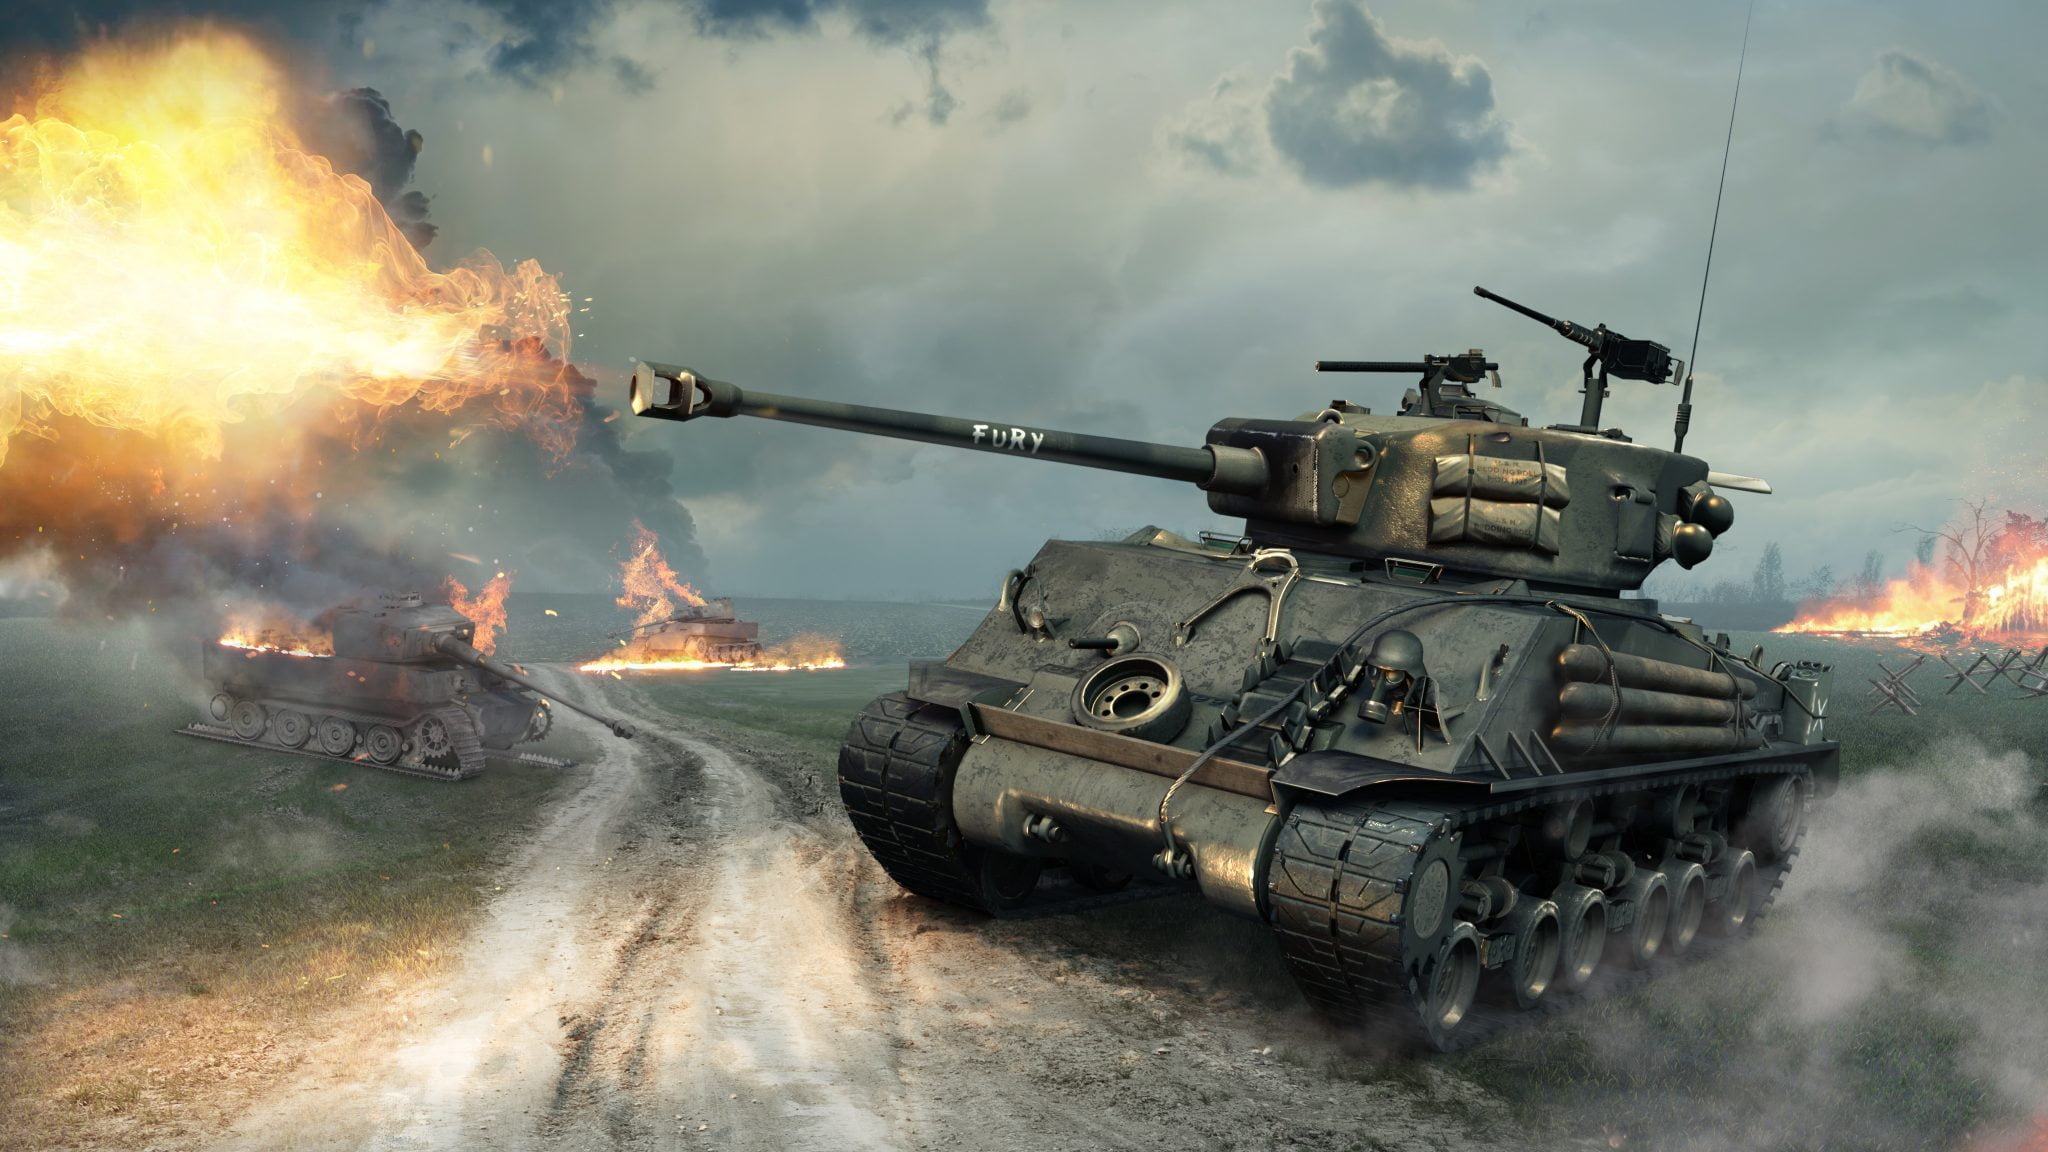 Sony Pictures’ “FURY” Coming to World of Tanks 18